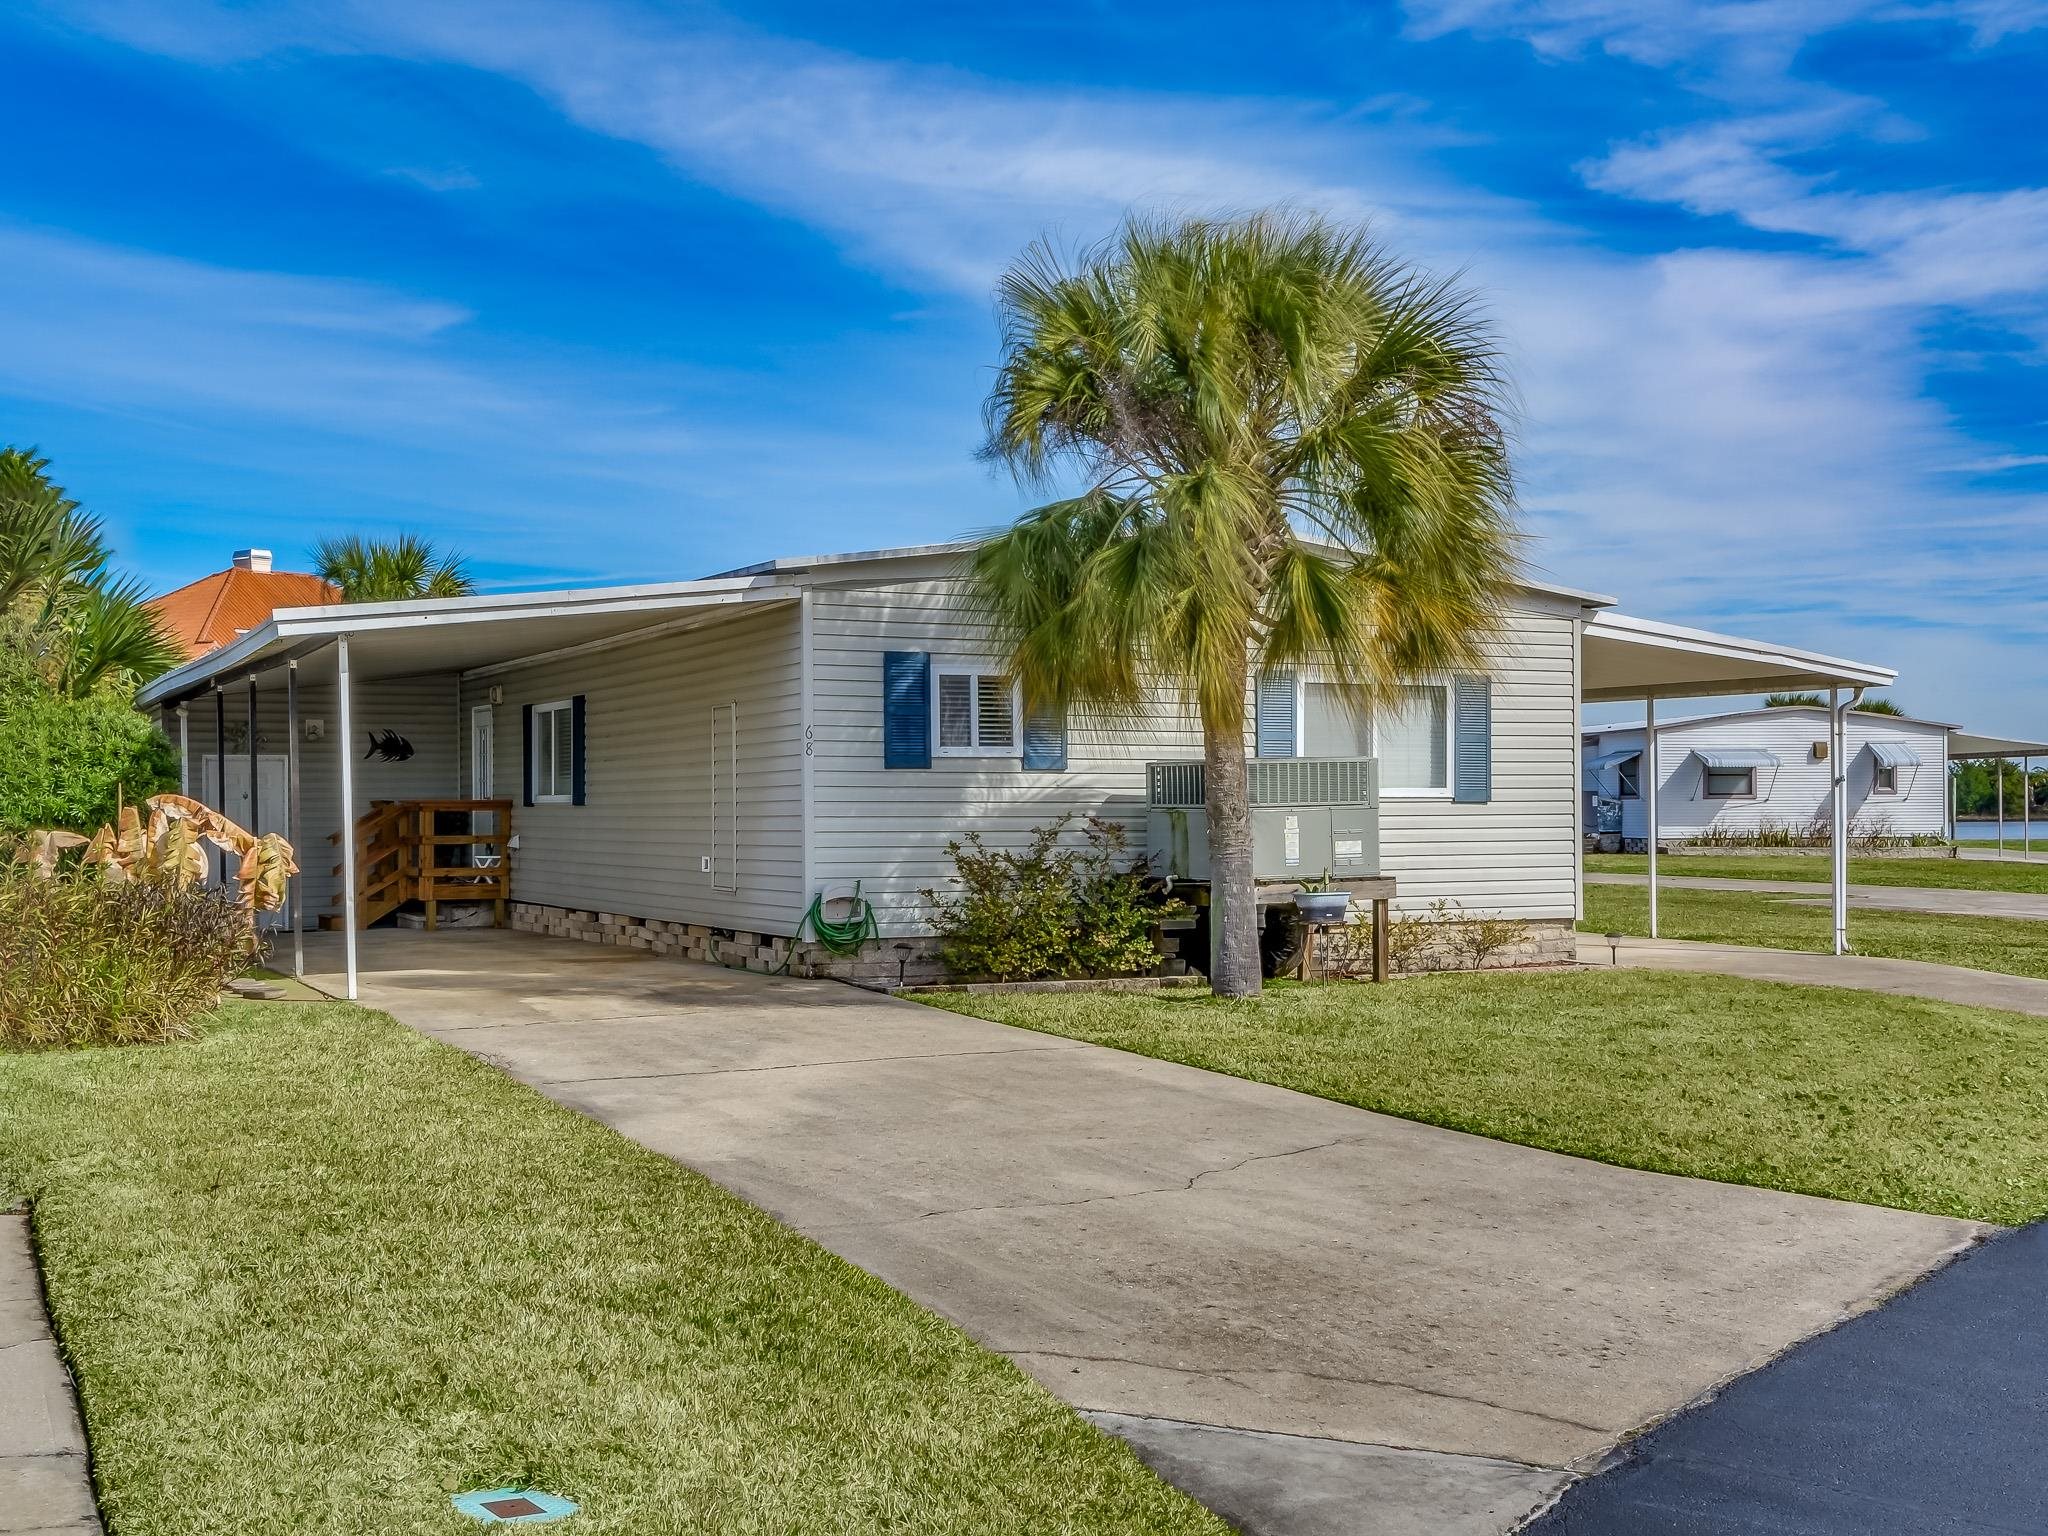 68 Connie Drive,CRAWFORDVILLE,Florida 32327,3 Bedrooms Bedrooms,2 BathroomsBathrooms,Manuf/mobile home,68 Connie Drive,370124